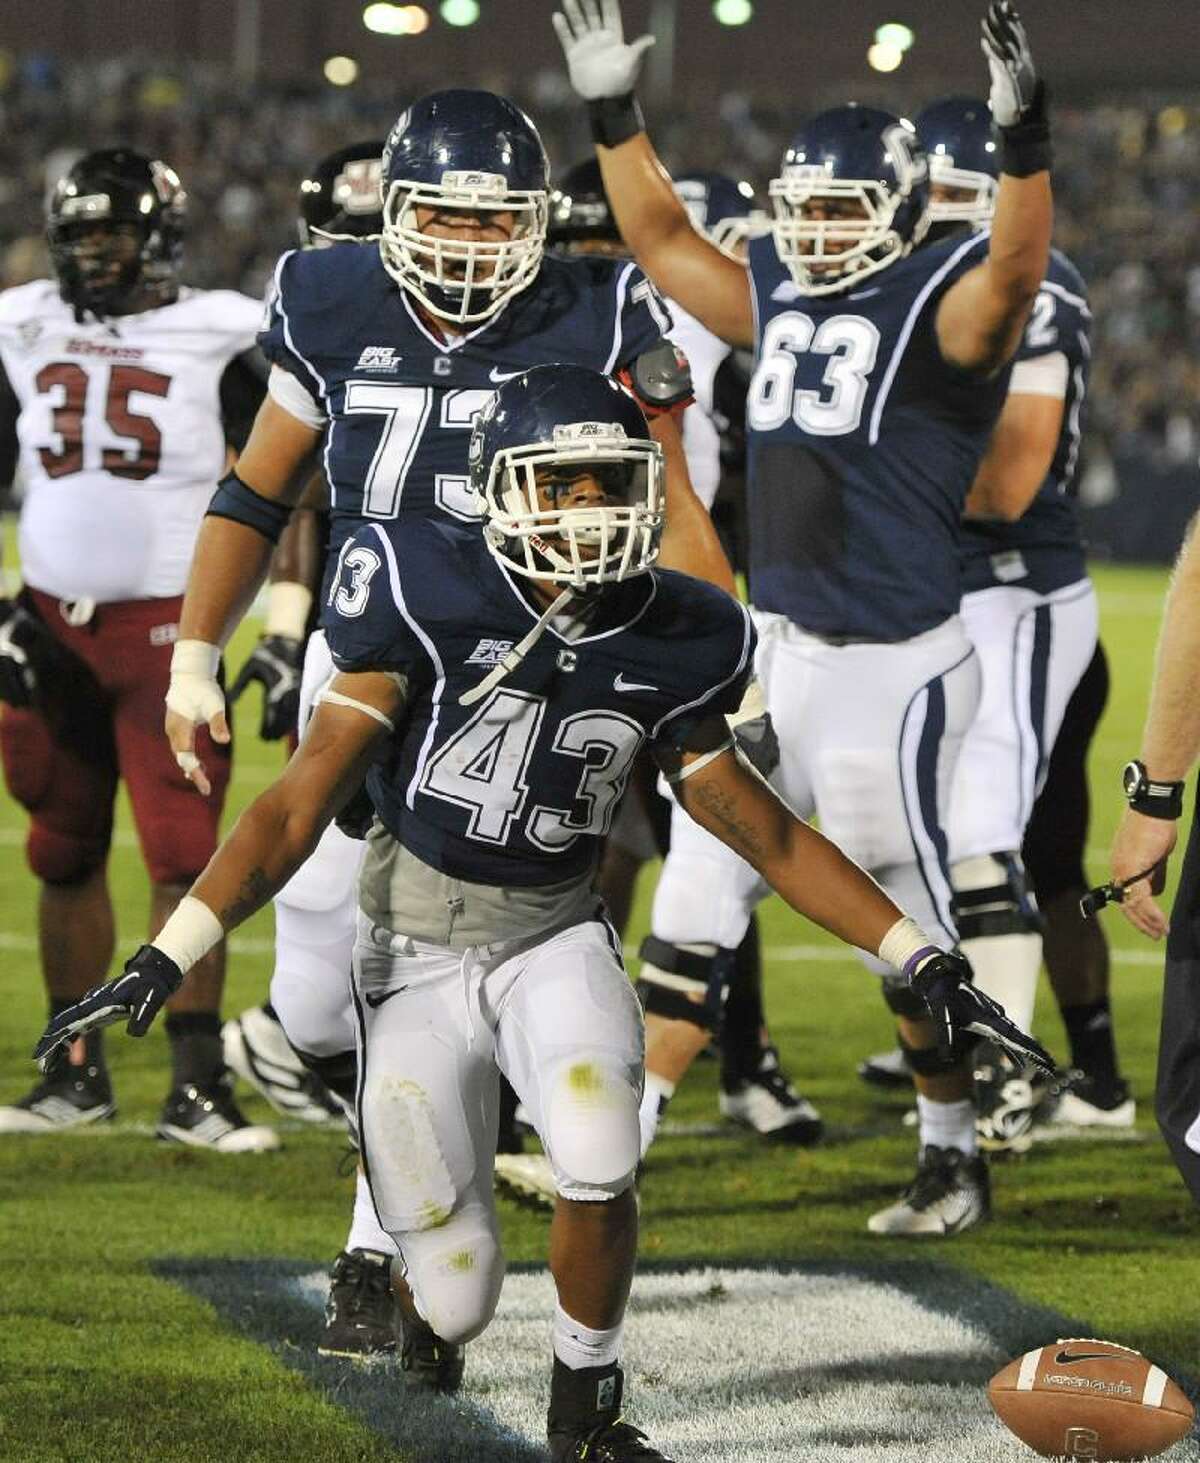 ASSOCIATED PRESS UConn running back Lyle McCombs (43) celebrates his touchdown against UMass during the first half of Thursday night's game at Rentschler Field in East Hartford.